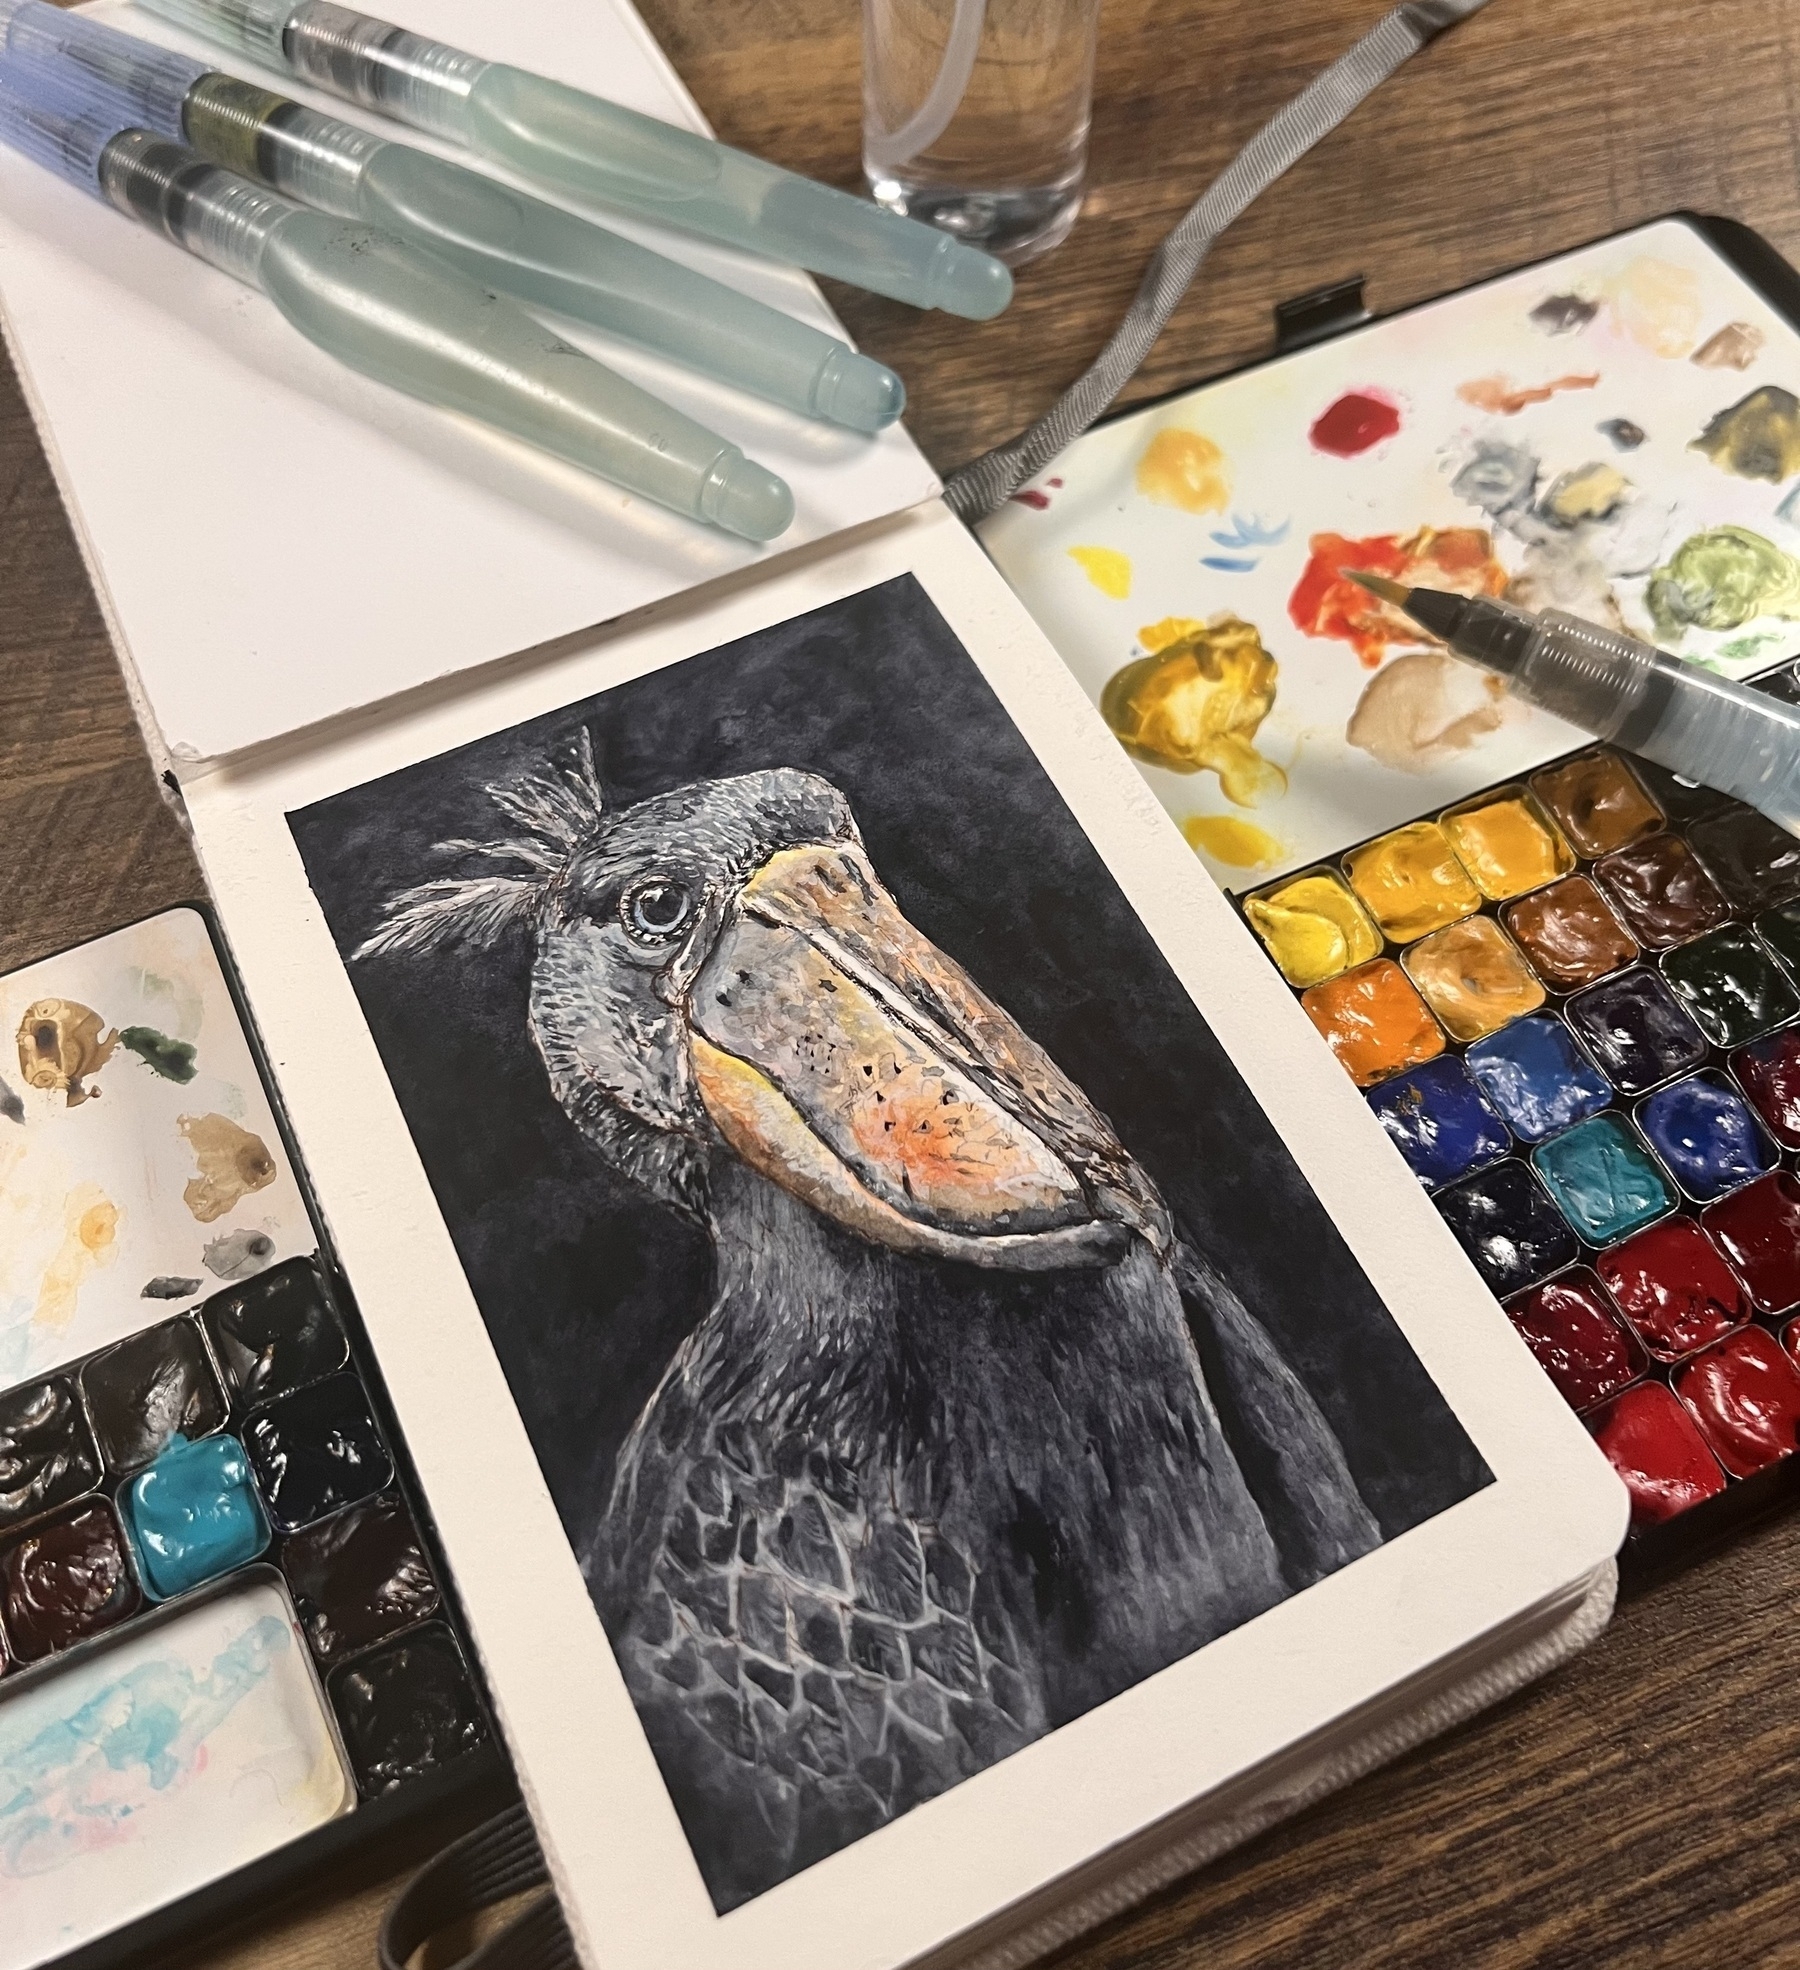 Shoebill stork watercolor in a sketchbook. Surrounded by two palettes and some water brushes 